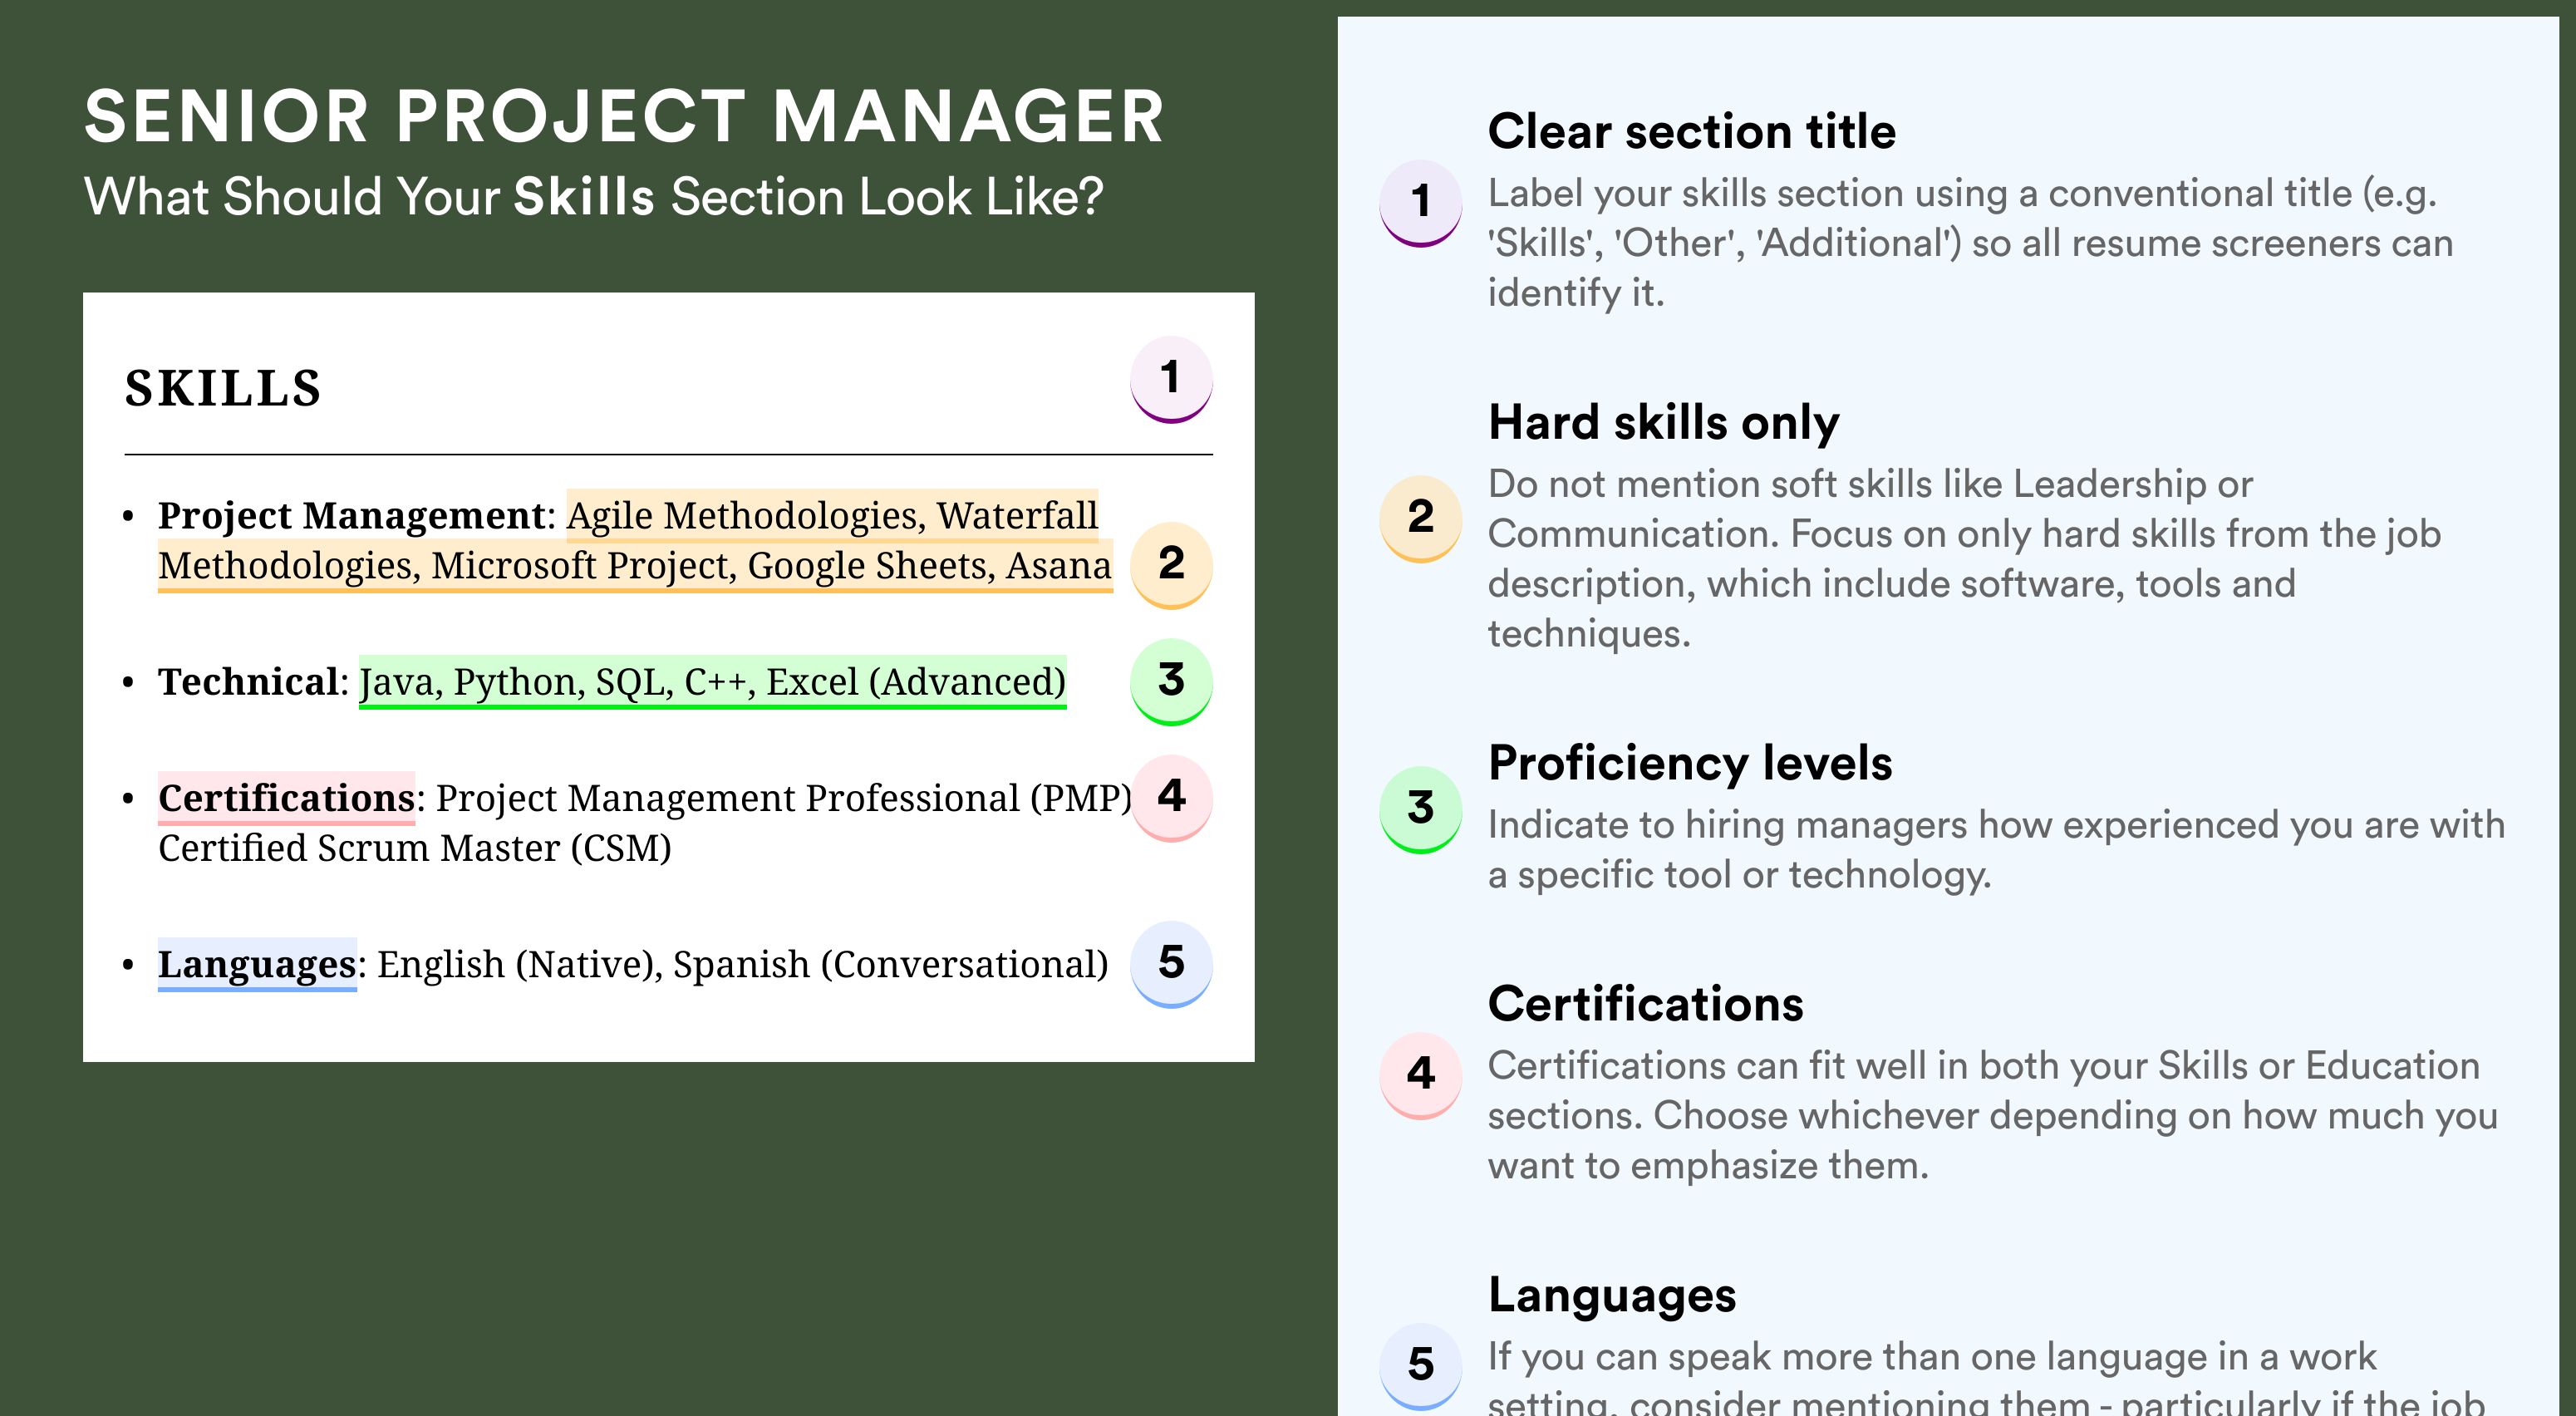 How To Write Your Skills Section - Senior Project Manager Roles